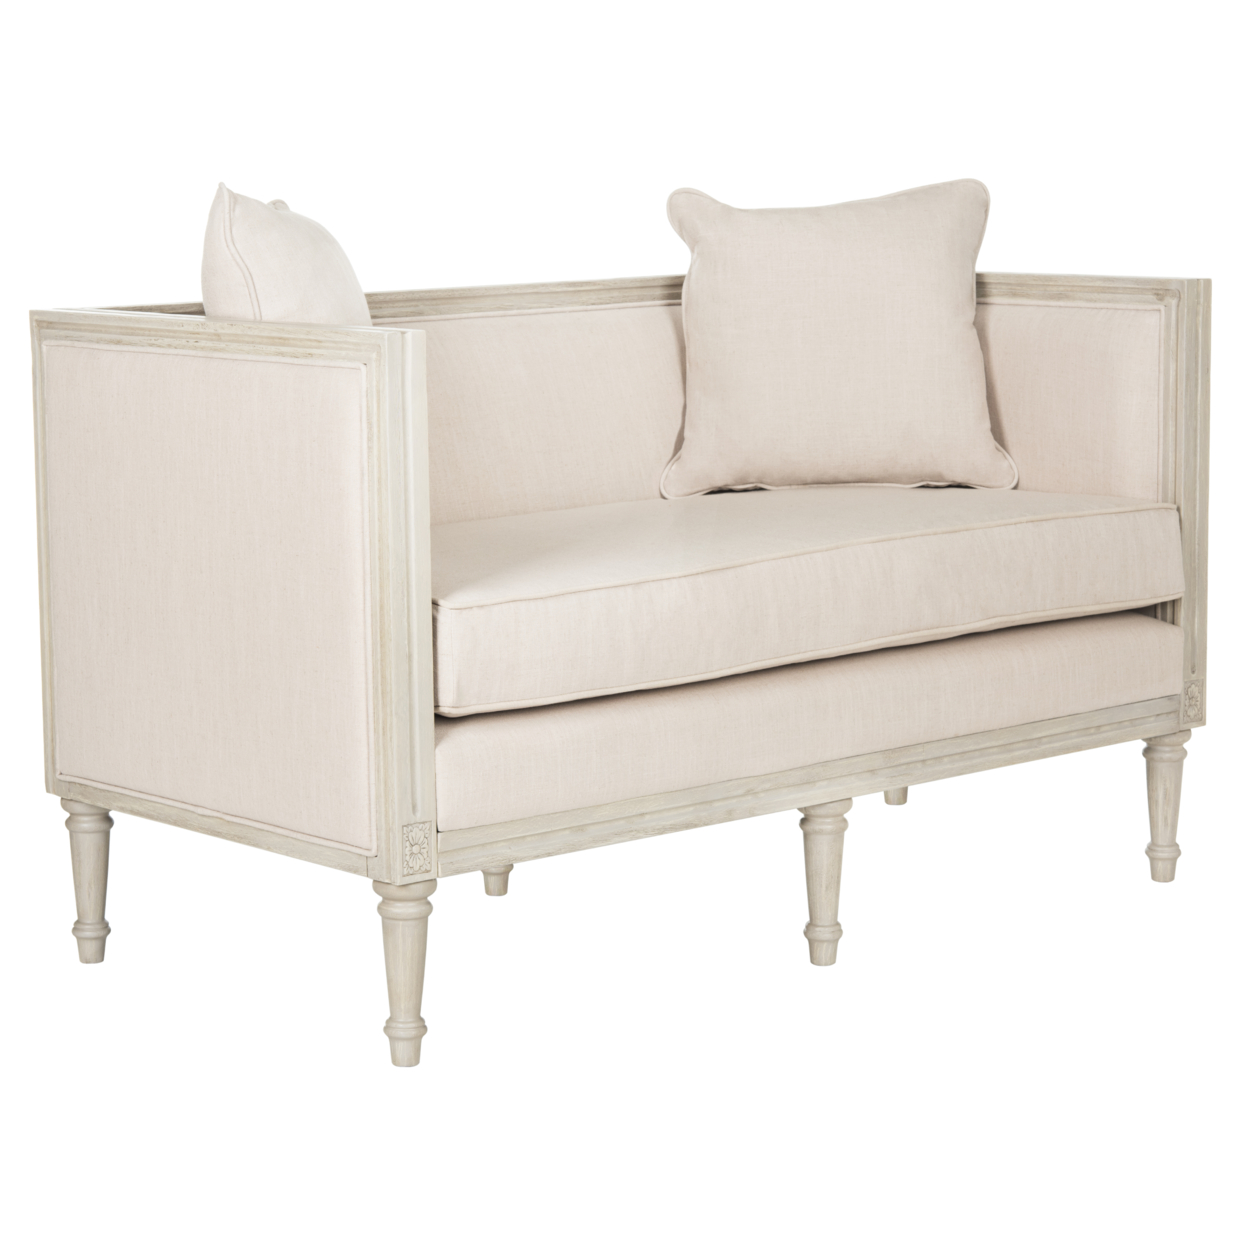 SAFAVIEH Leandra Rustic French Country Settee Beige / Rustic Grey